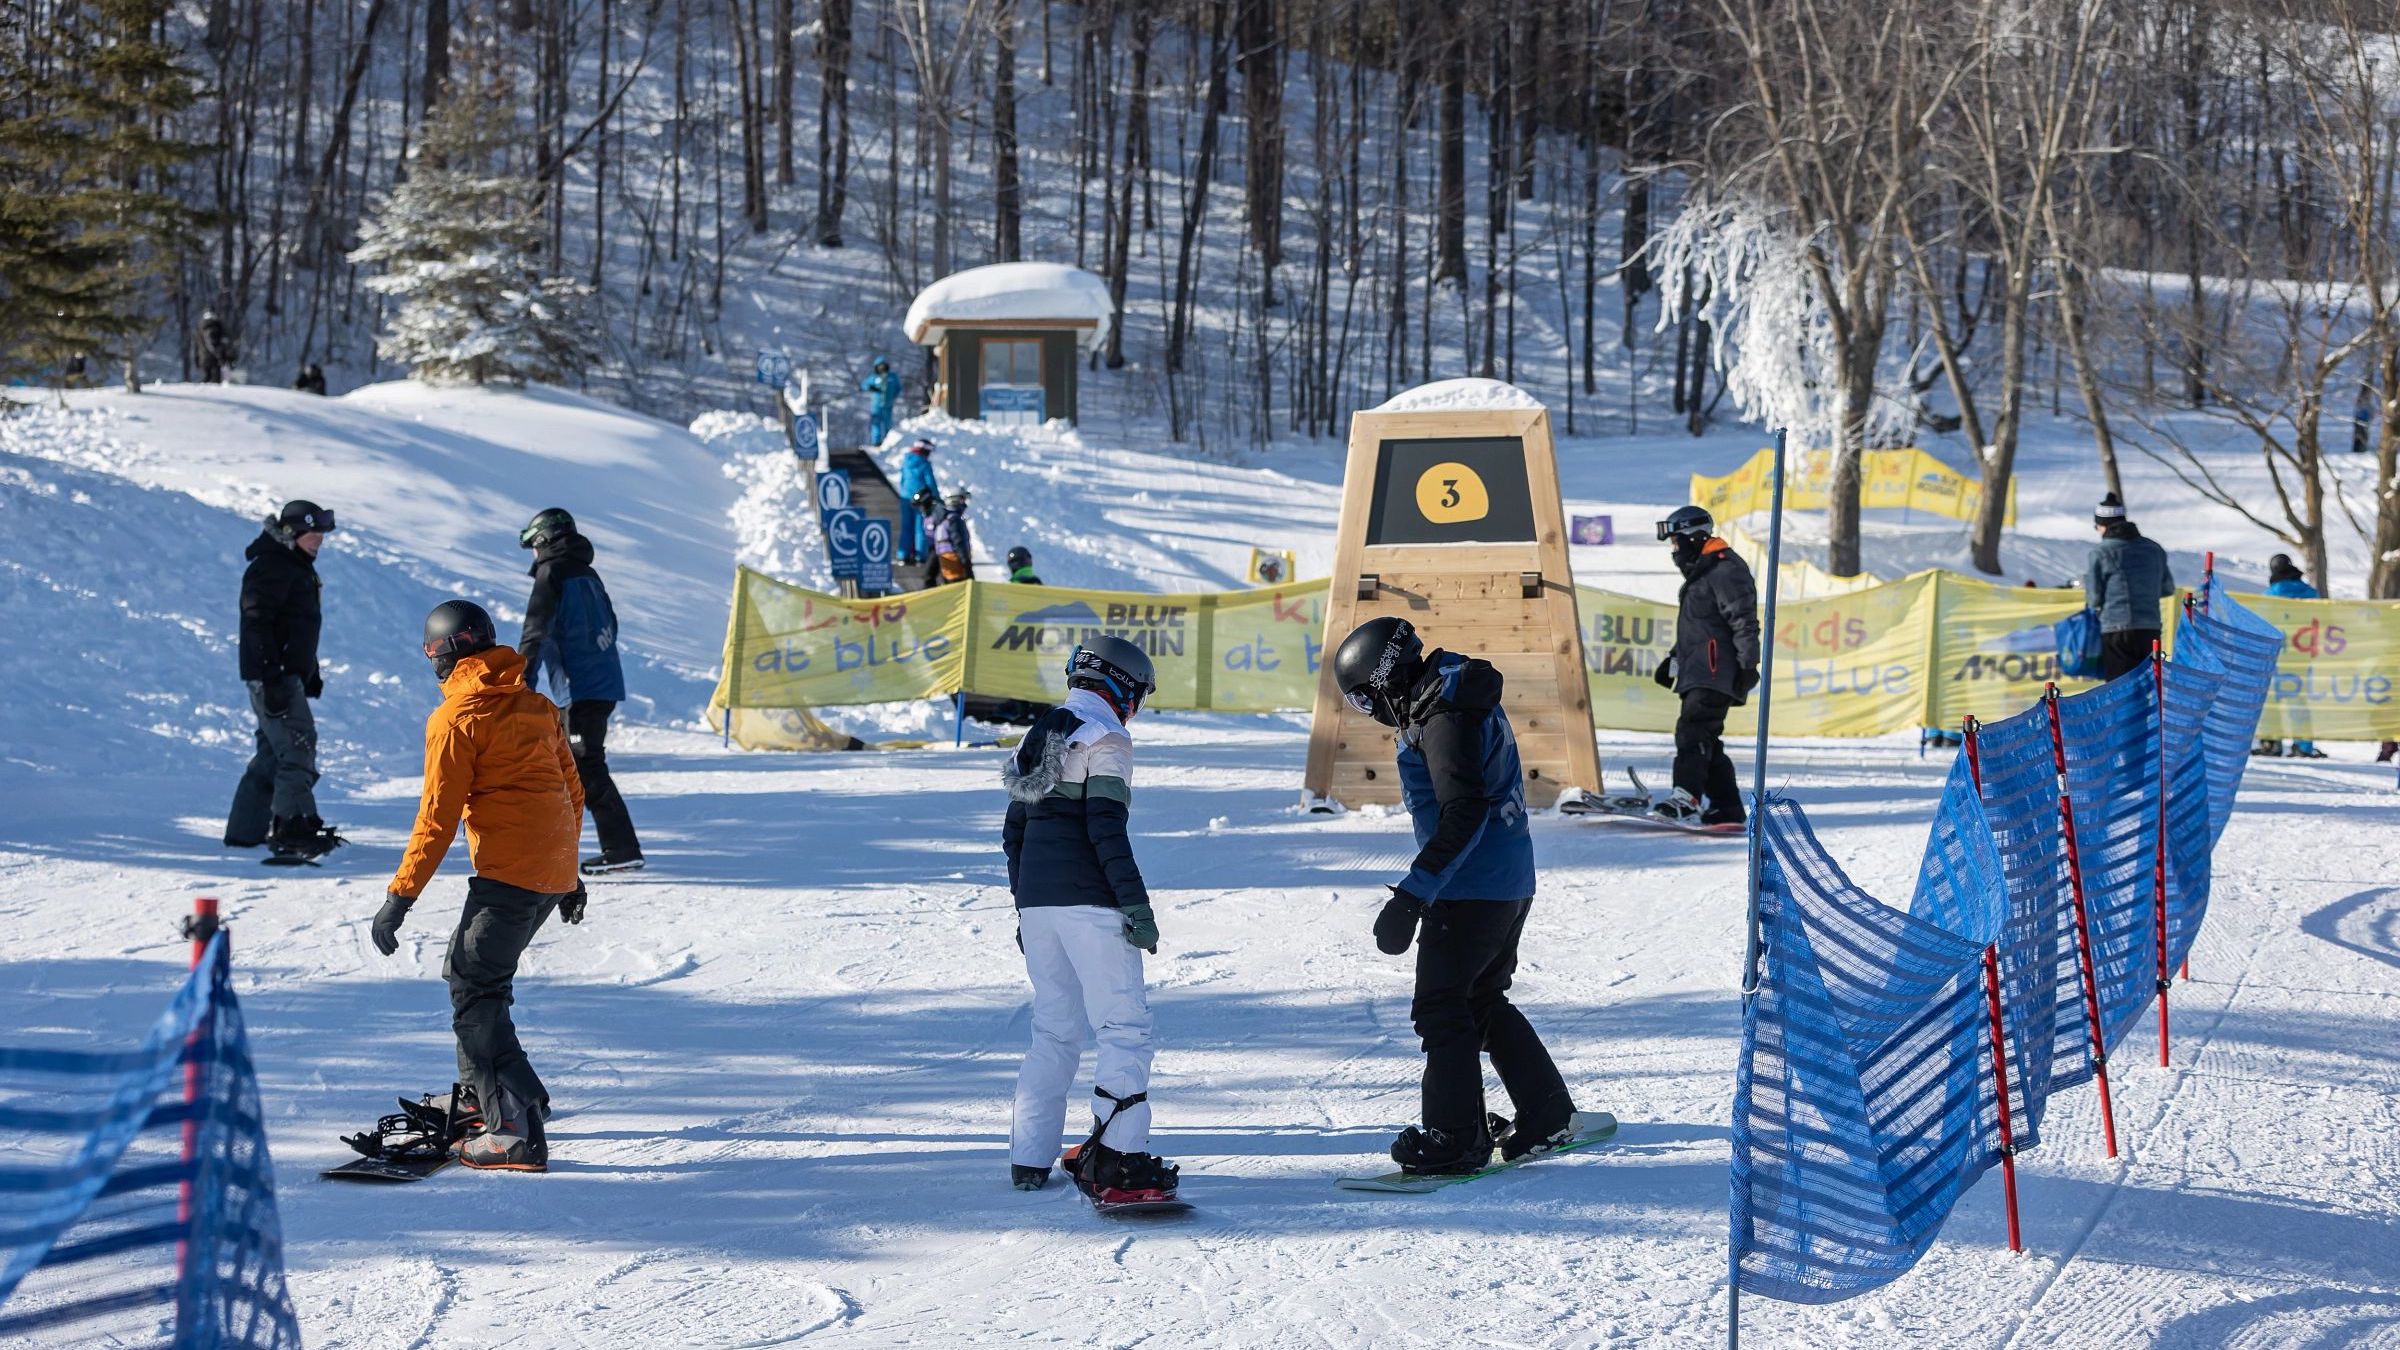 New Learners on the hill to Learn to Ski and Snowboard at Blue Mountain